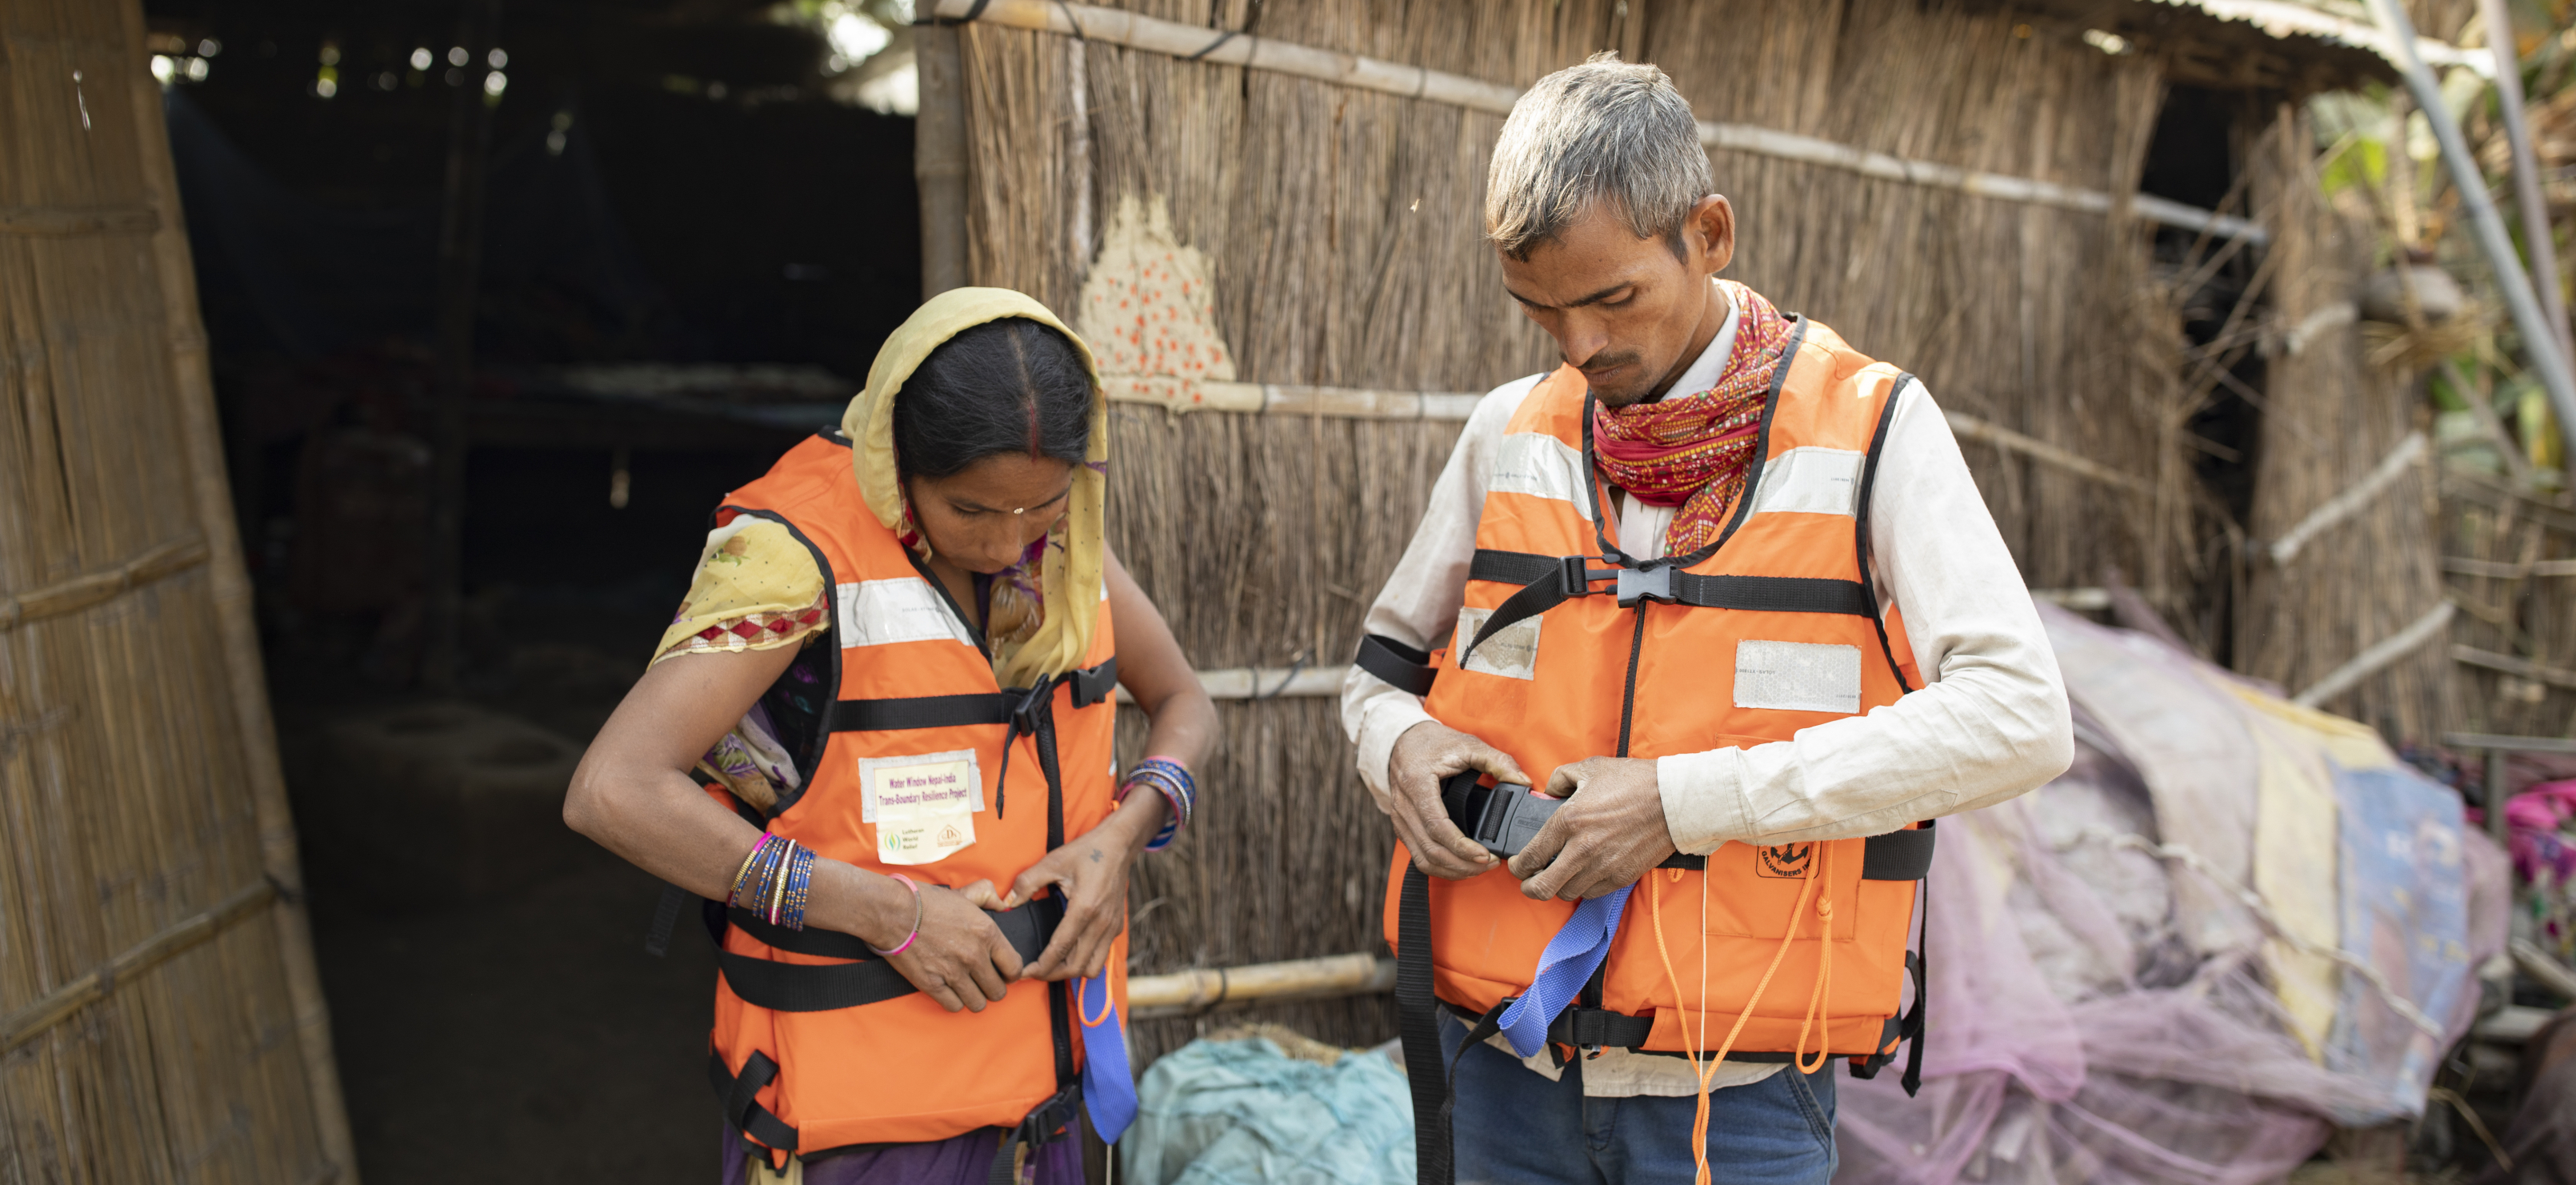 Nikky Devi and her husband Rajendra Kushwaha put on life jackets in a flood-preparation drill outside their home in West Champaran District, Bihar, India as part of Lutheran World Relief’s Congregational Transboundary Flood Resilience project.